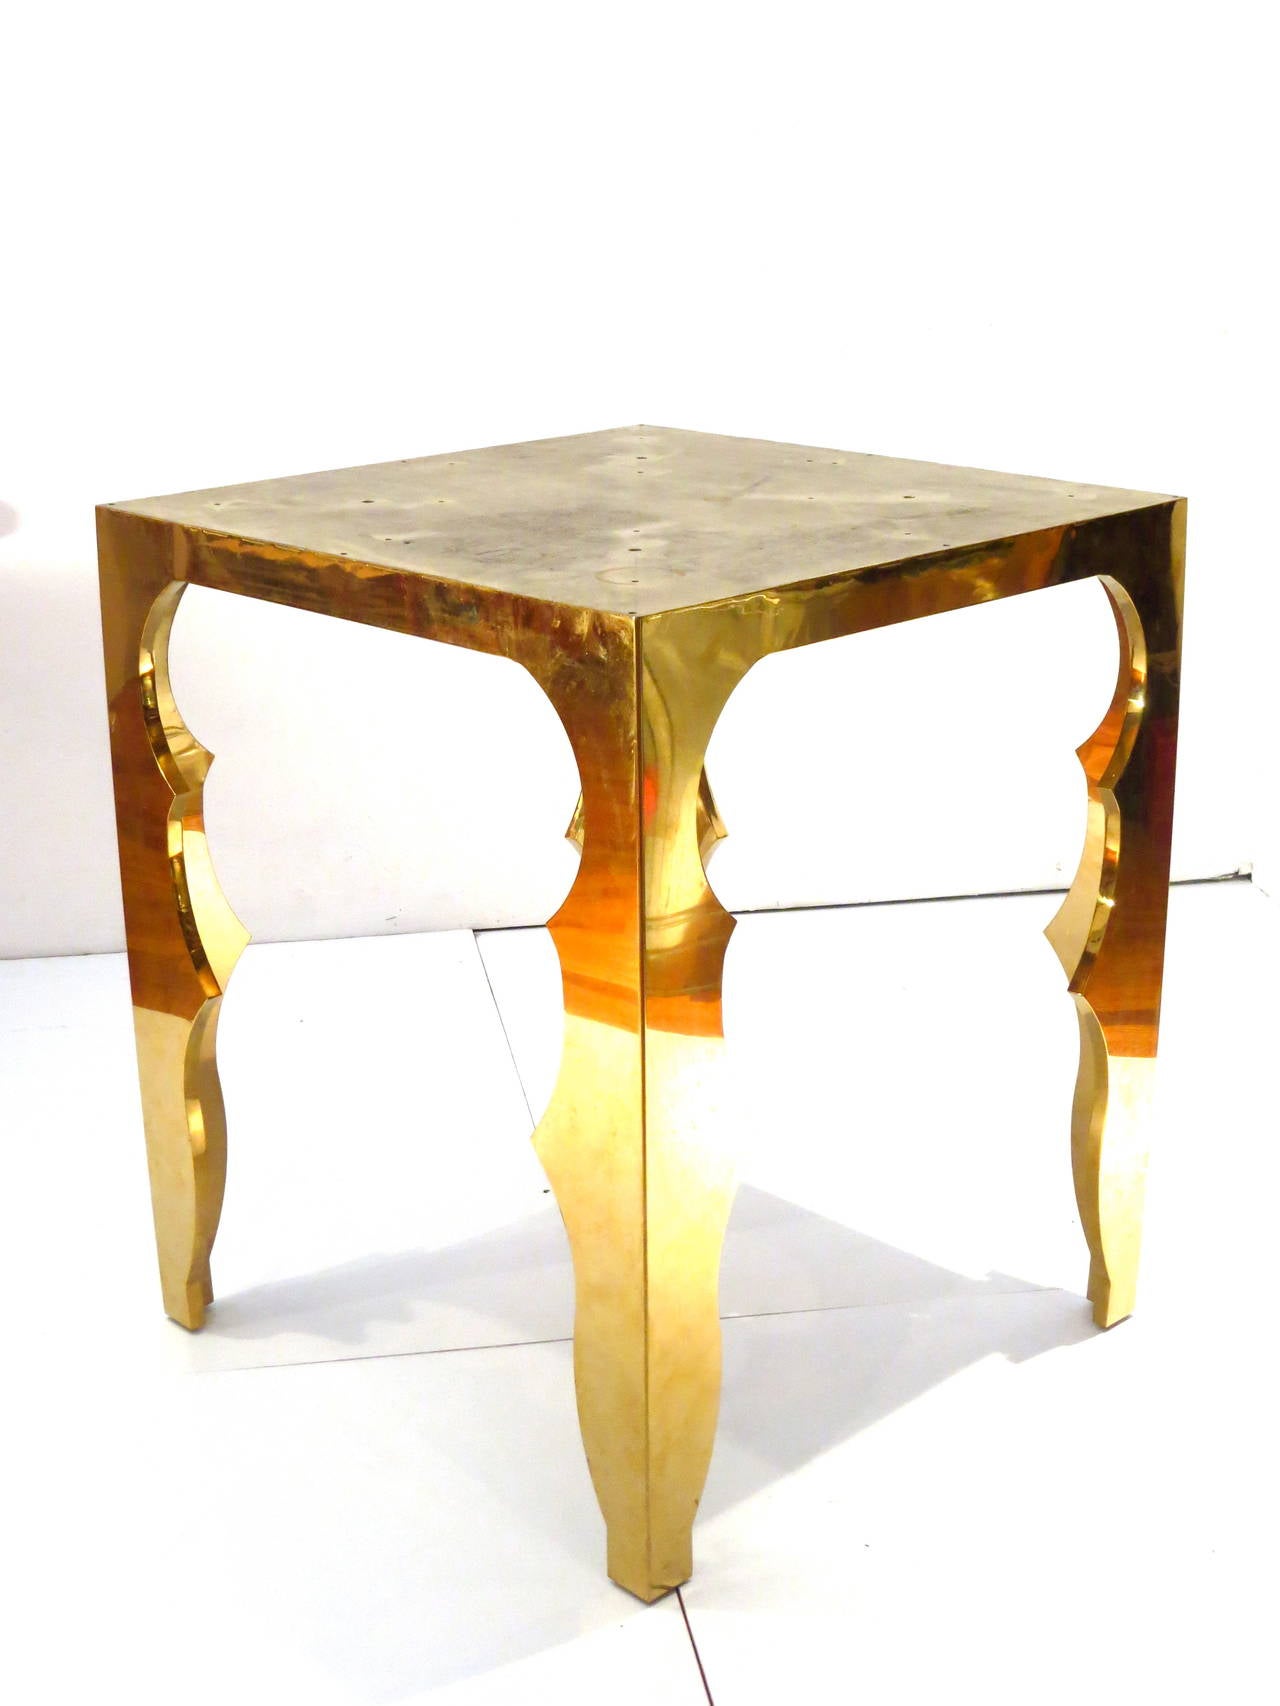 Hollywood Regency Monumental Large Brass Entry Table Hand-Hammered Top Scalloped Edge